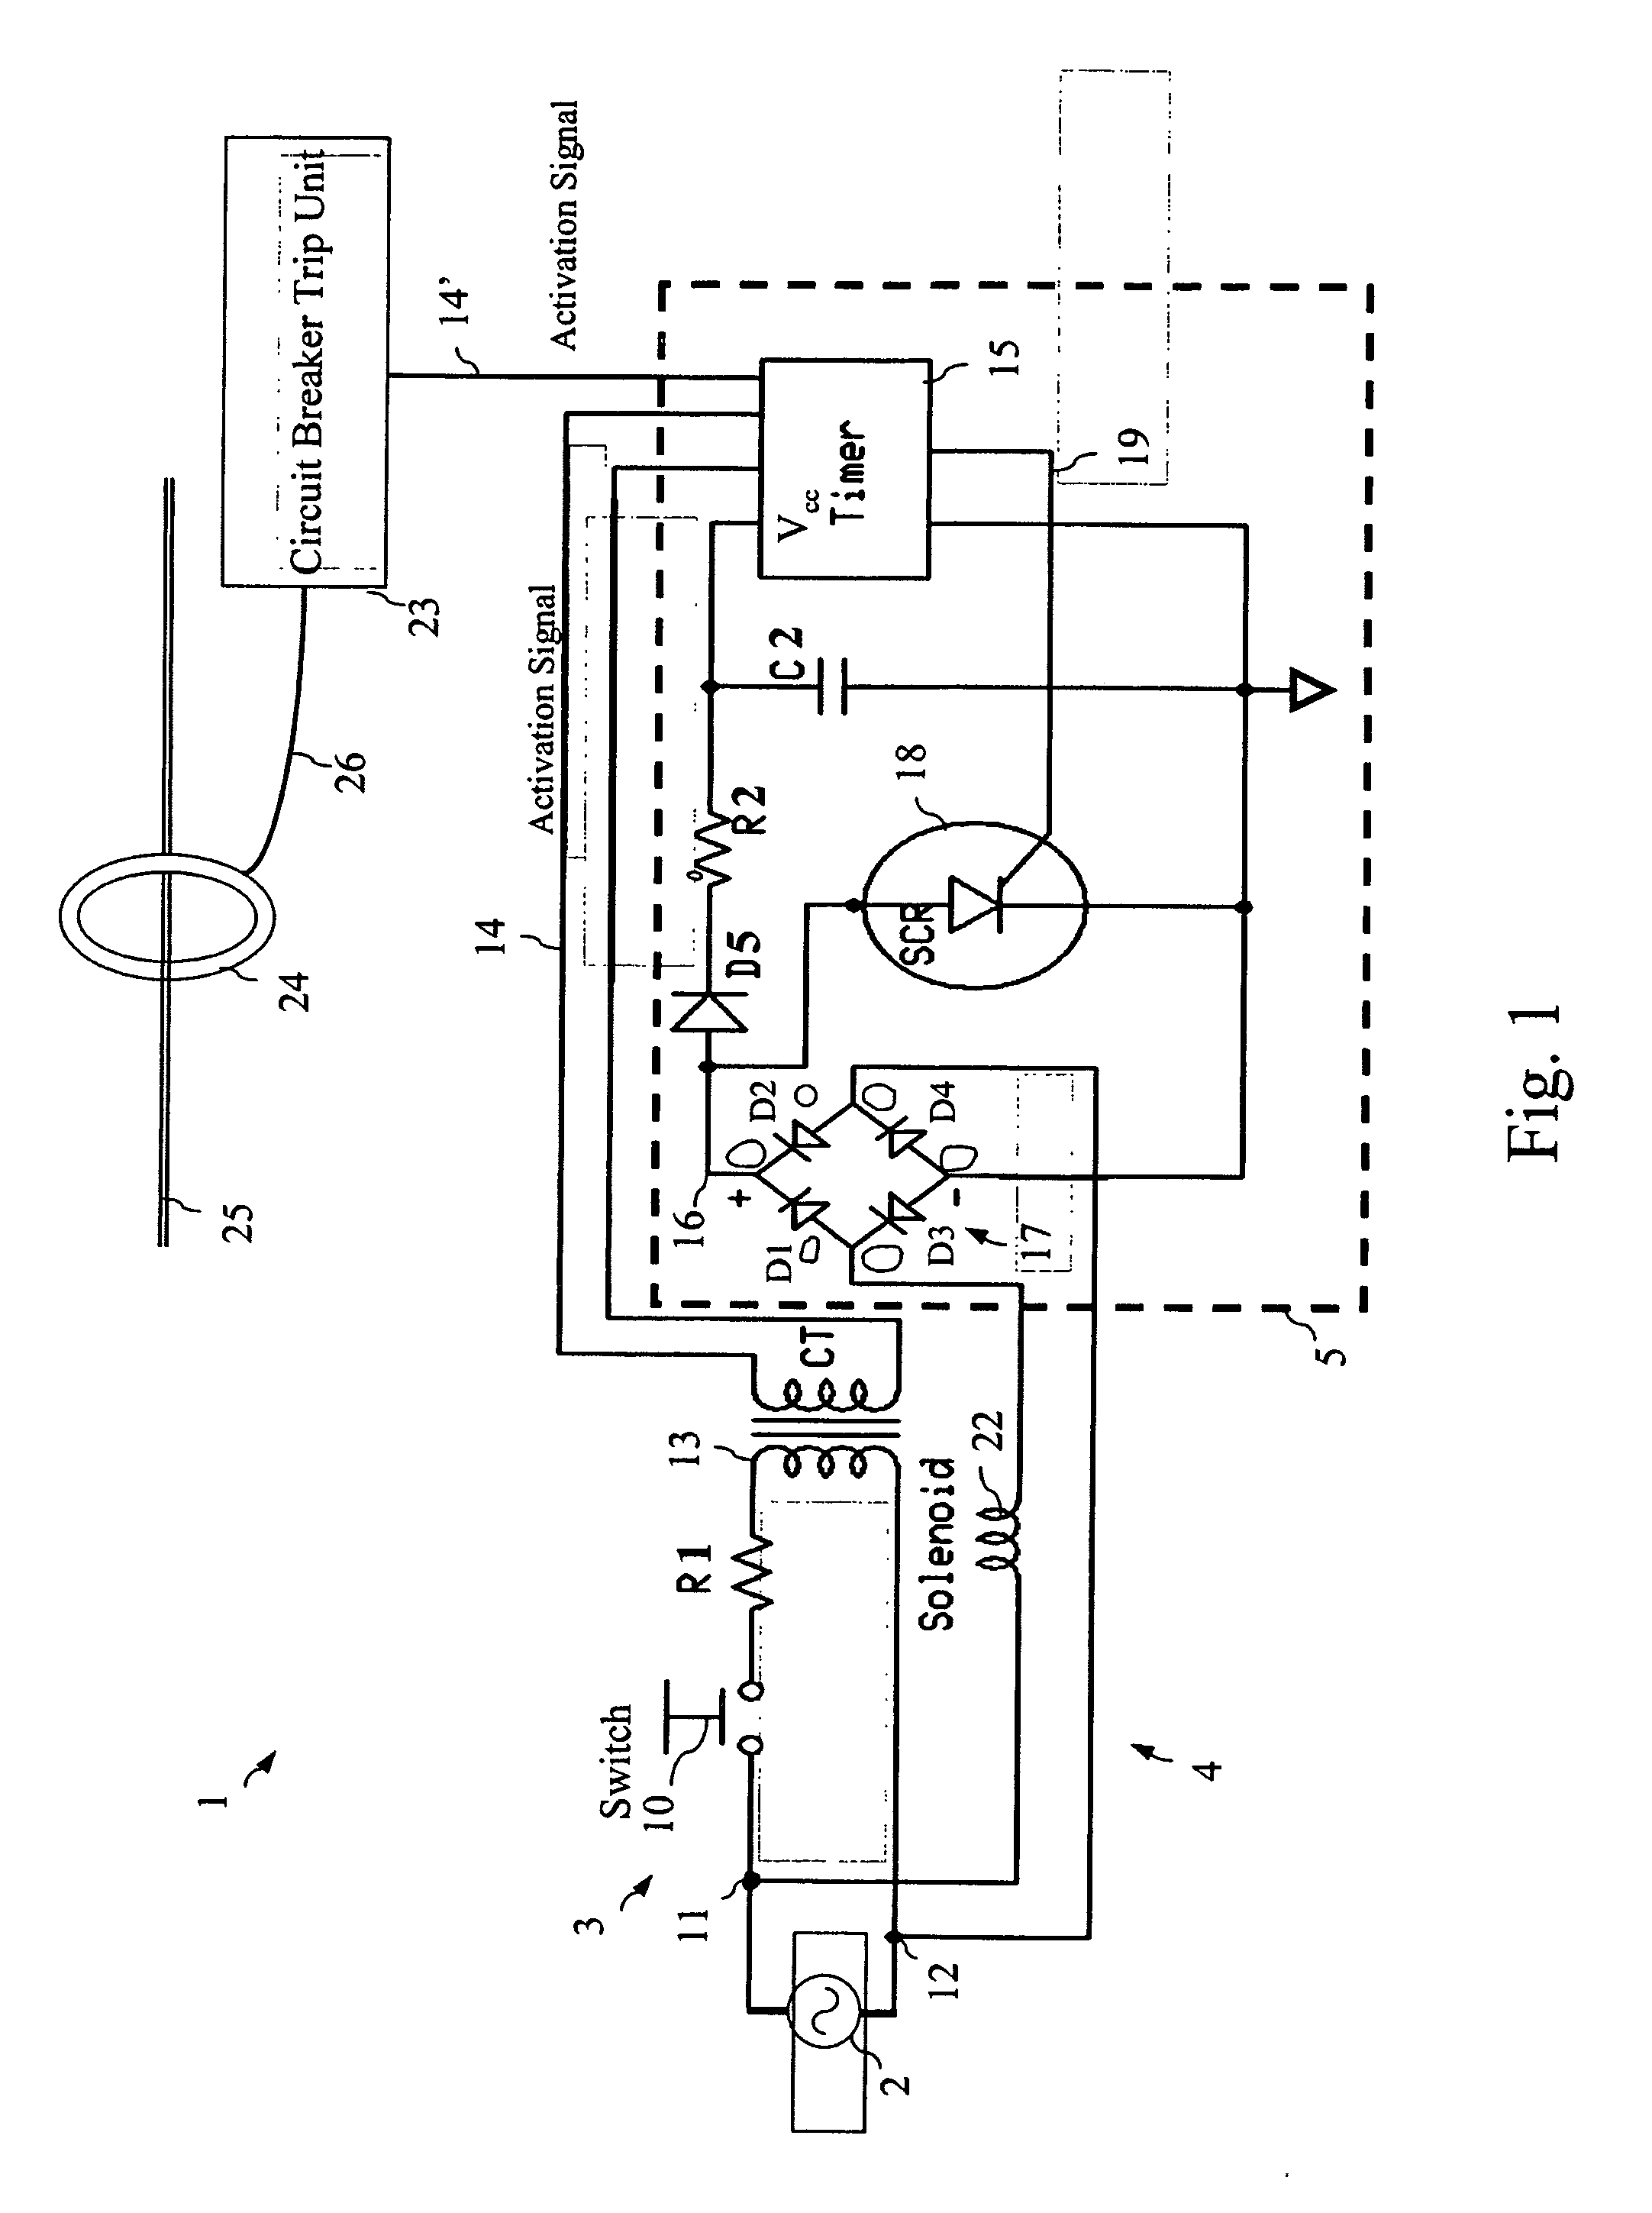 Apparatus and method for controlling a circuit breaker trip device